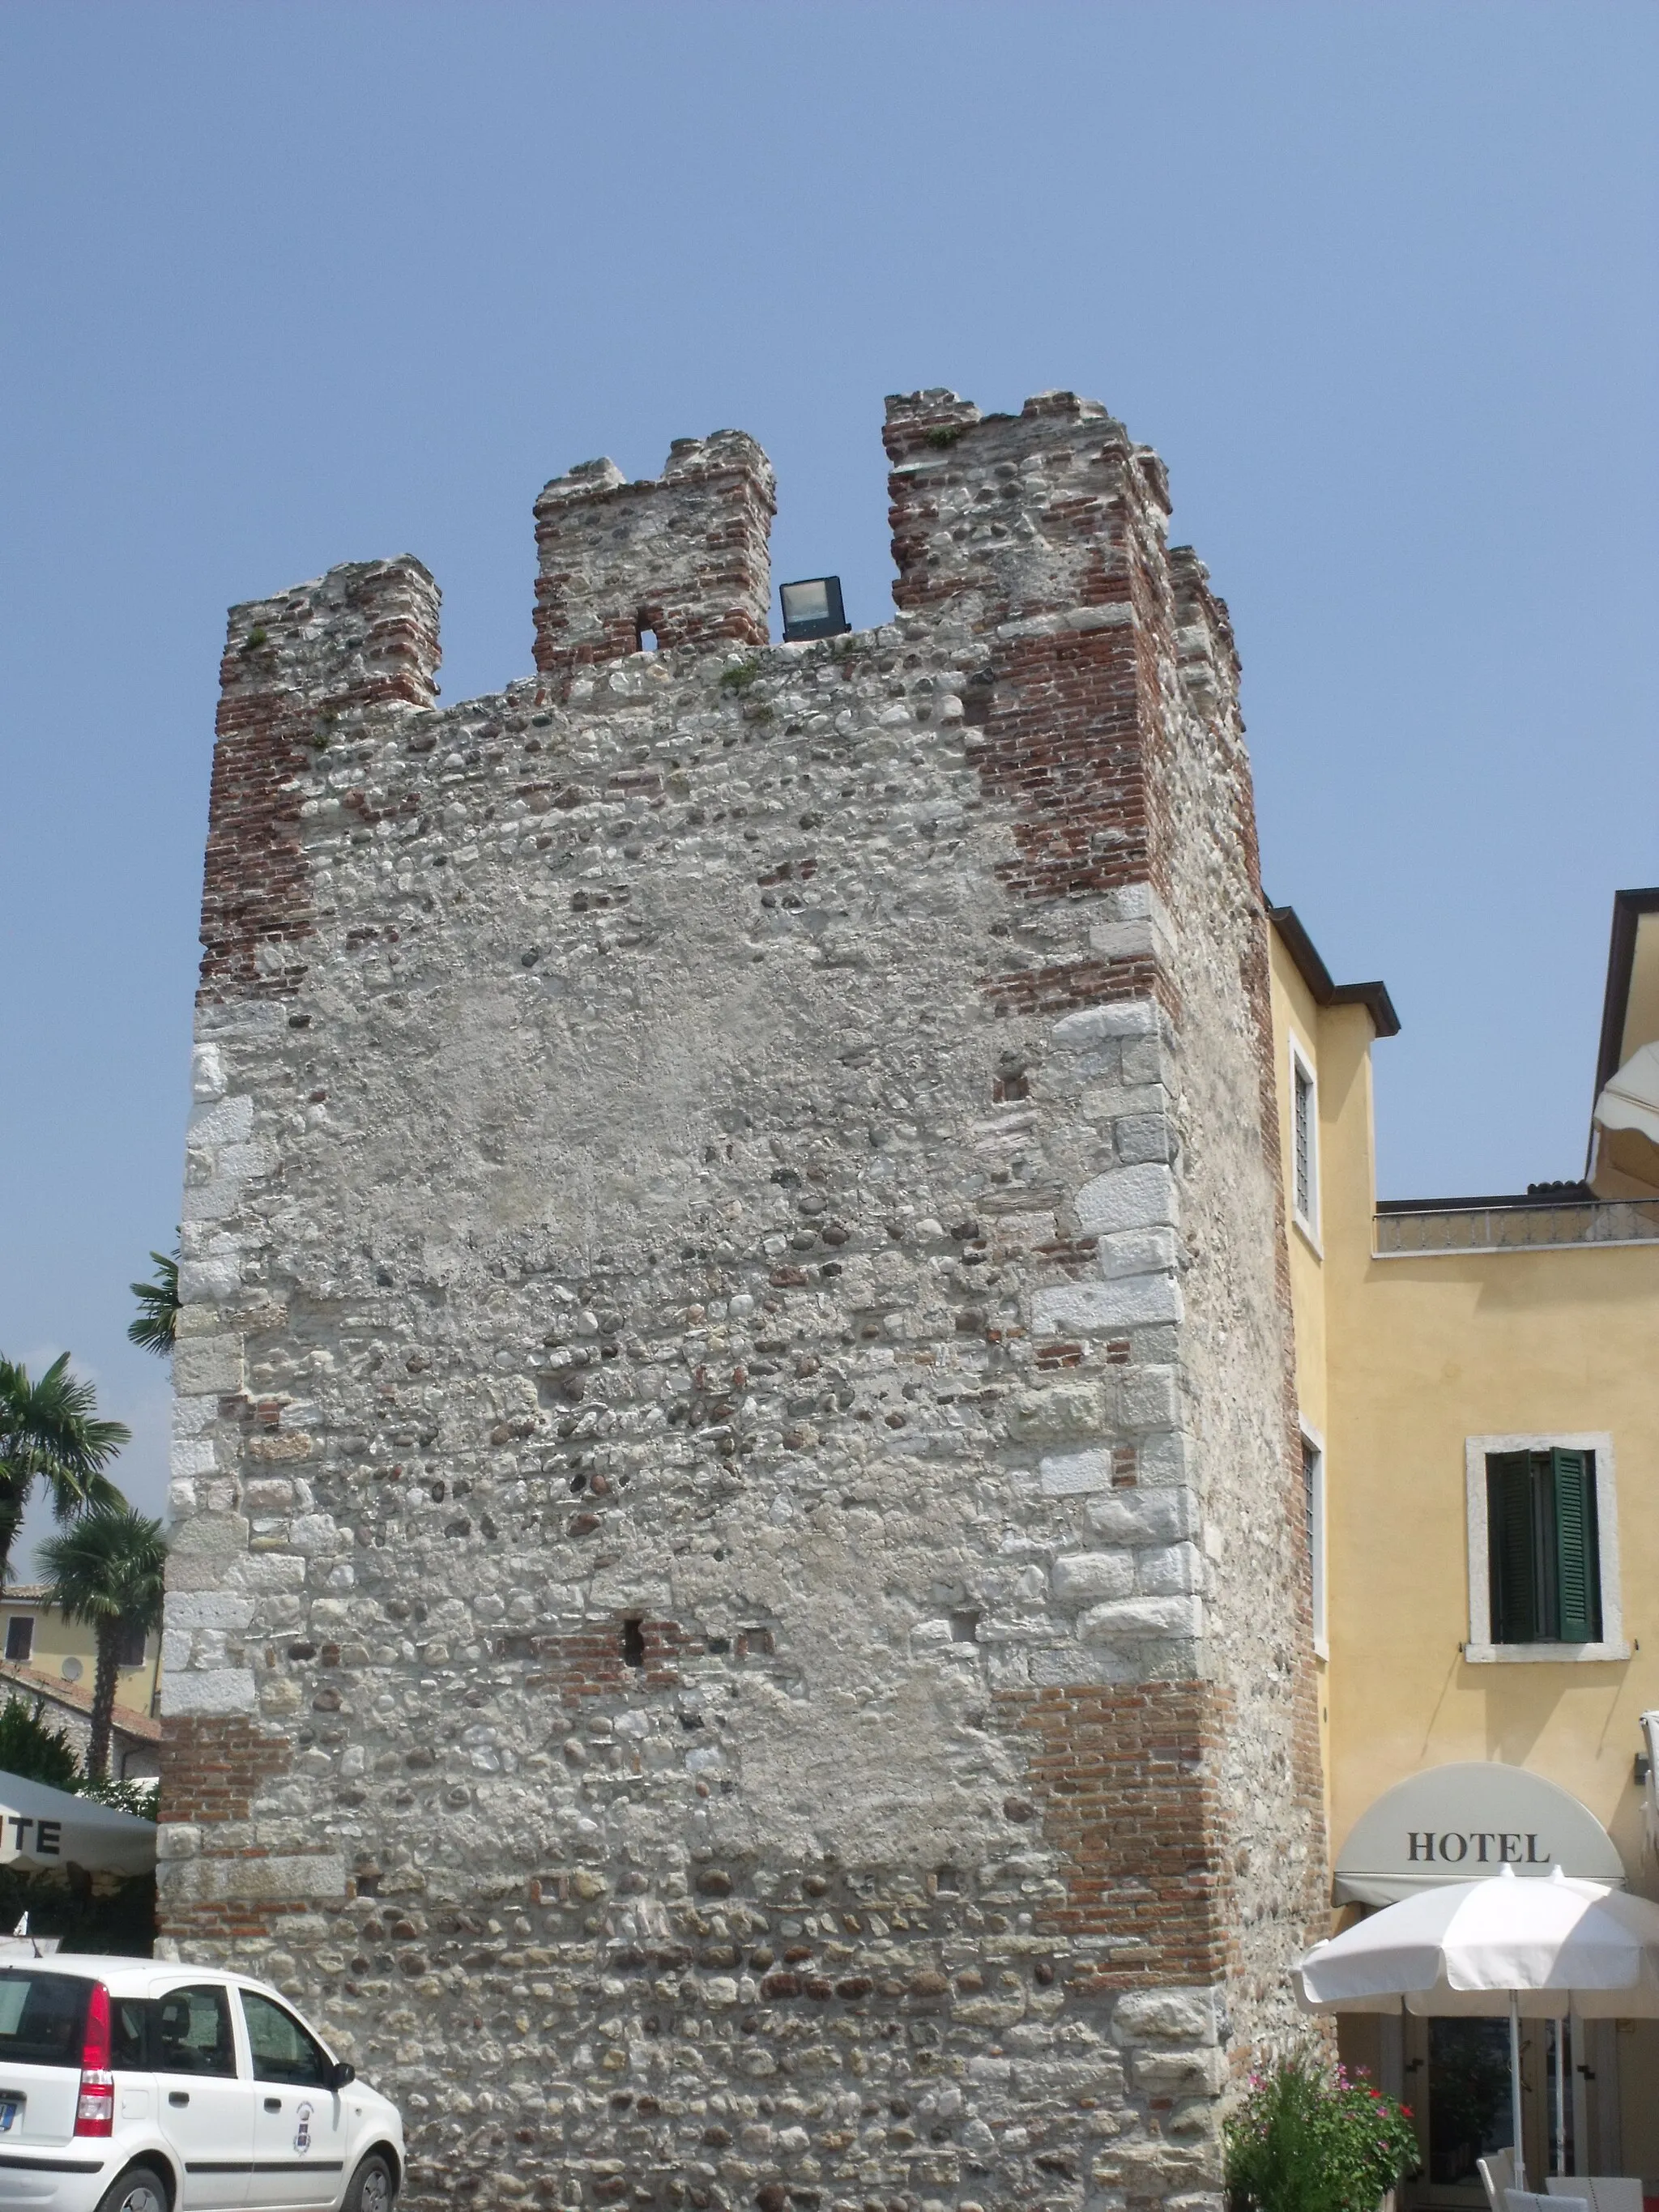 Photo showing: Lake Garda from Bardolino.
Only this remains of this ruined castle. Now built into a hotel. The Hotel Catullo.